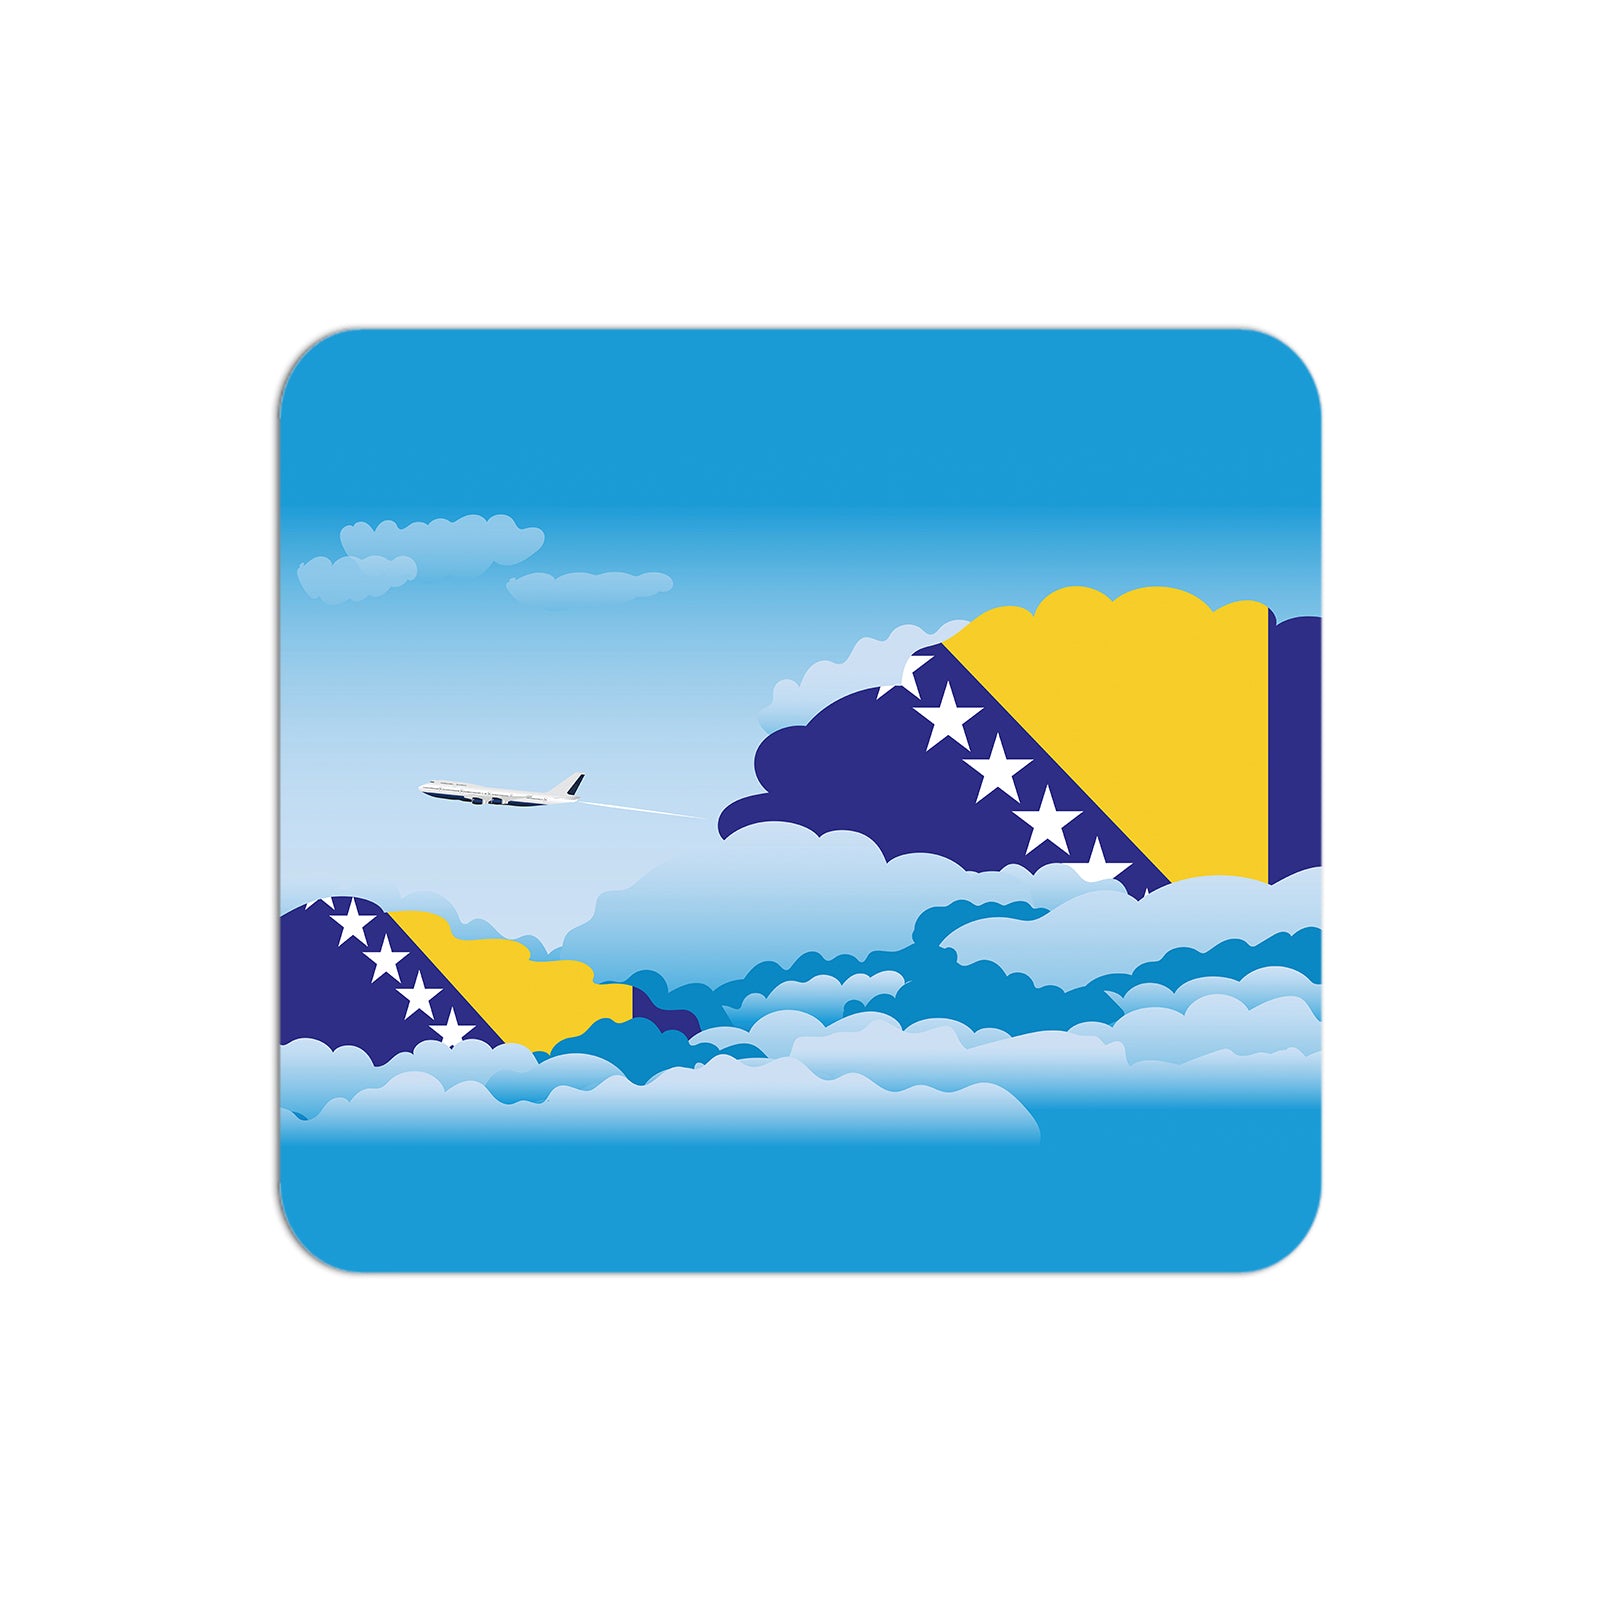 Bosnia and Herzegovina Flag Day Clouds Mouse pad 